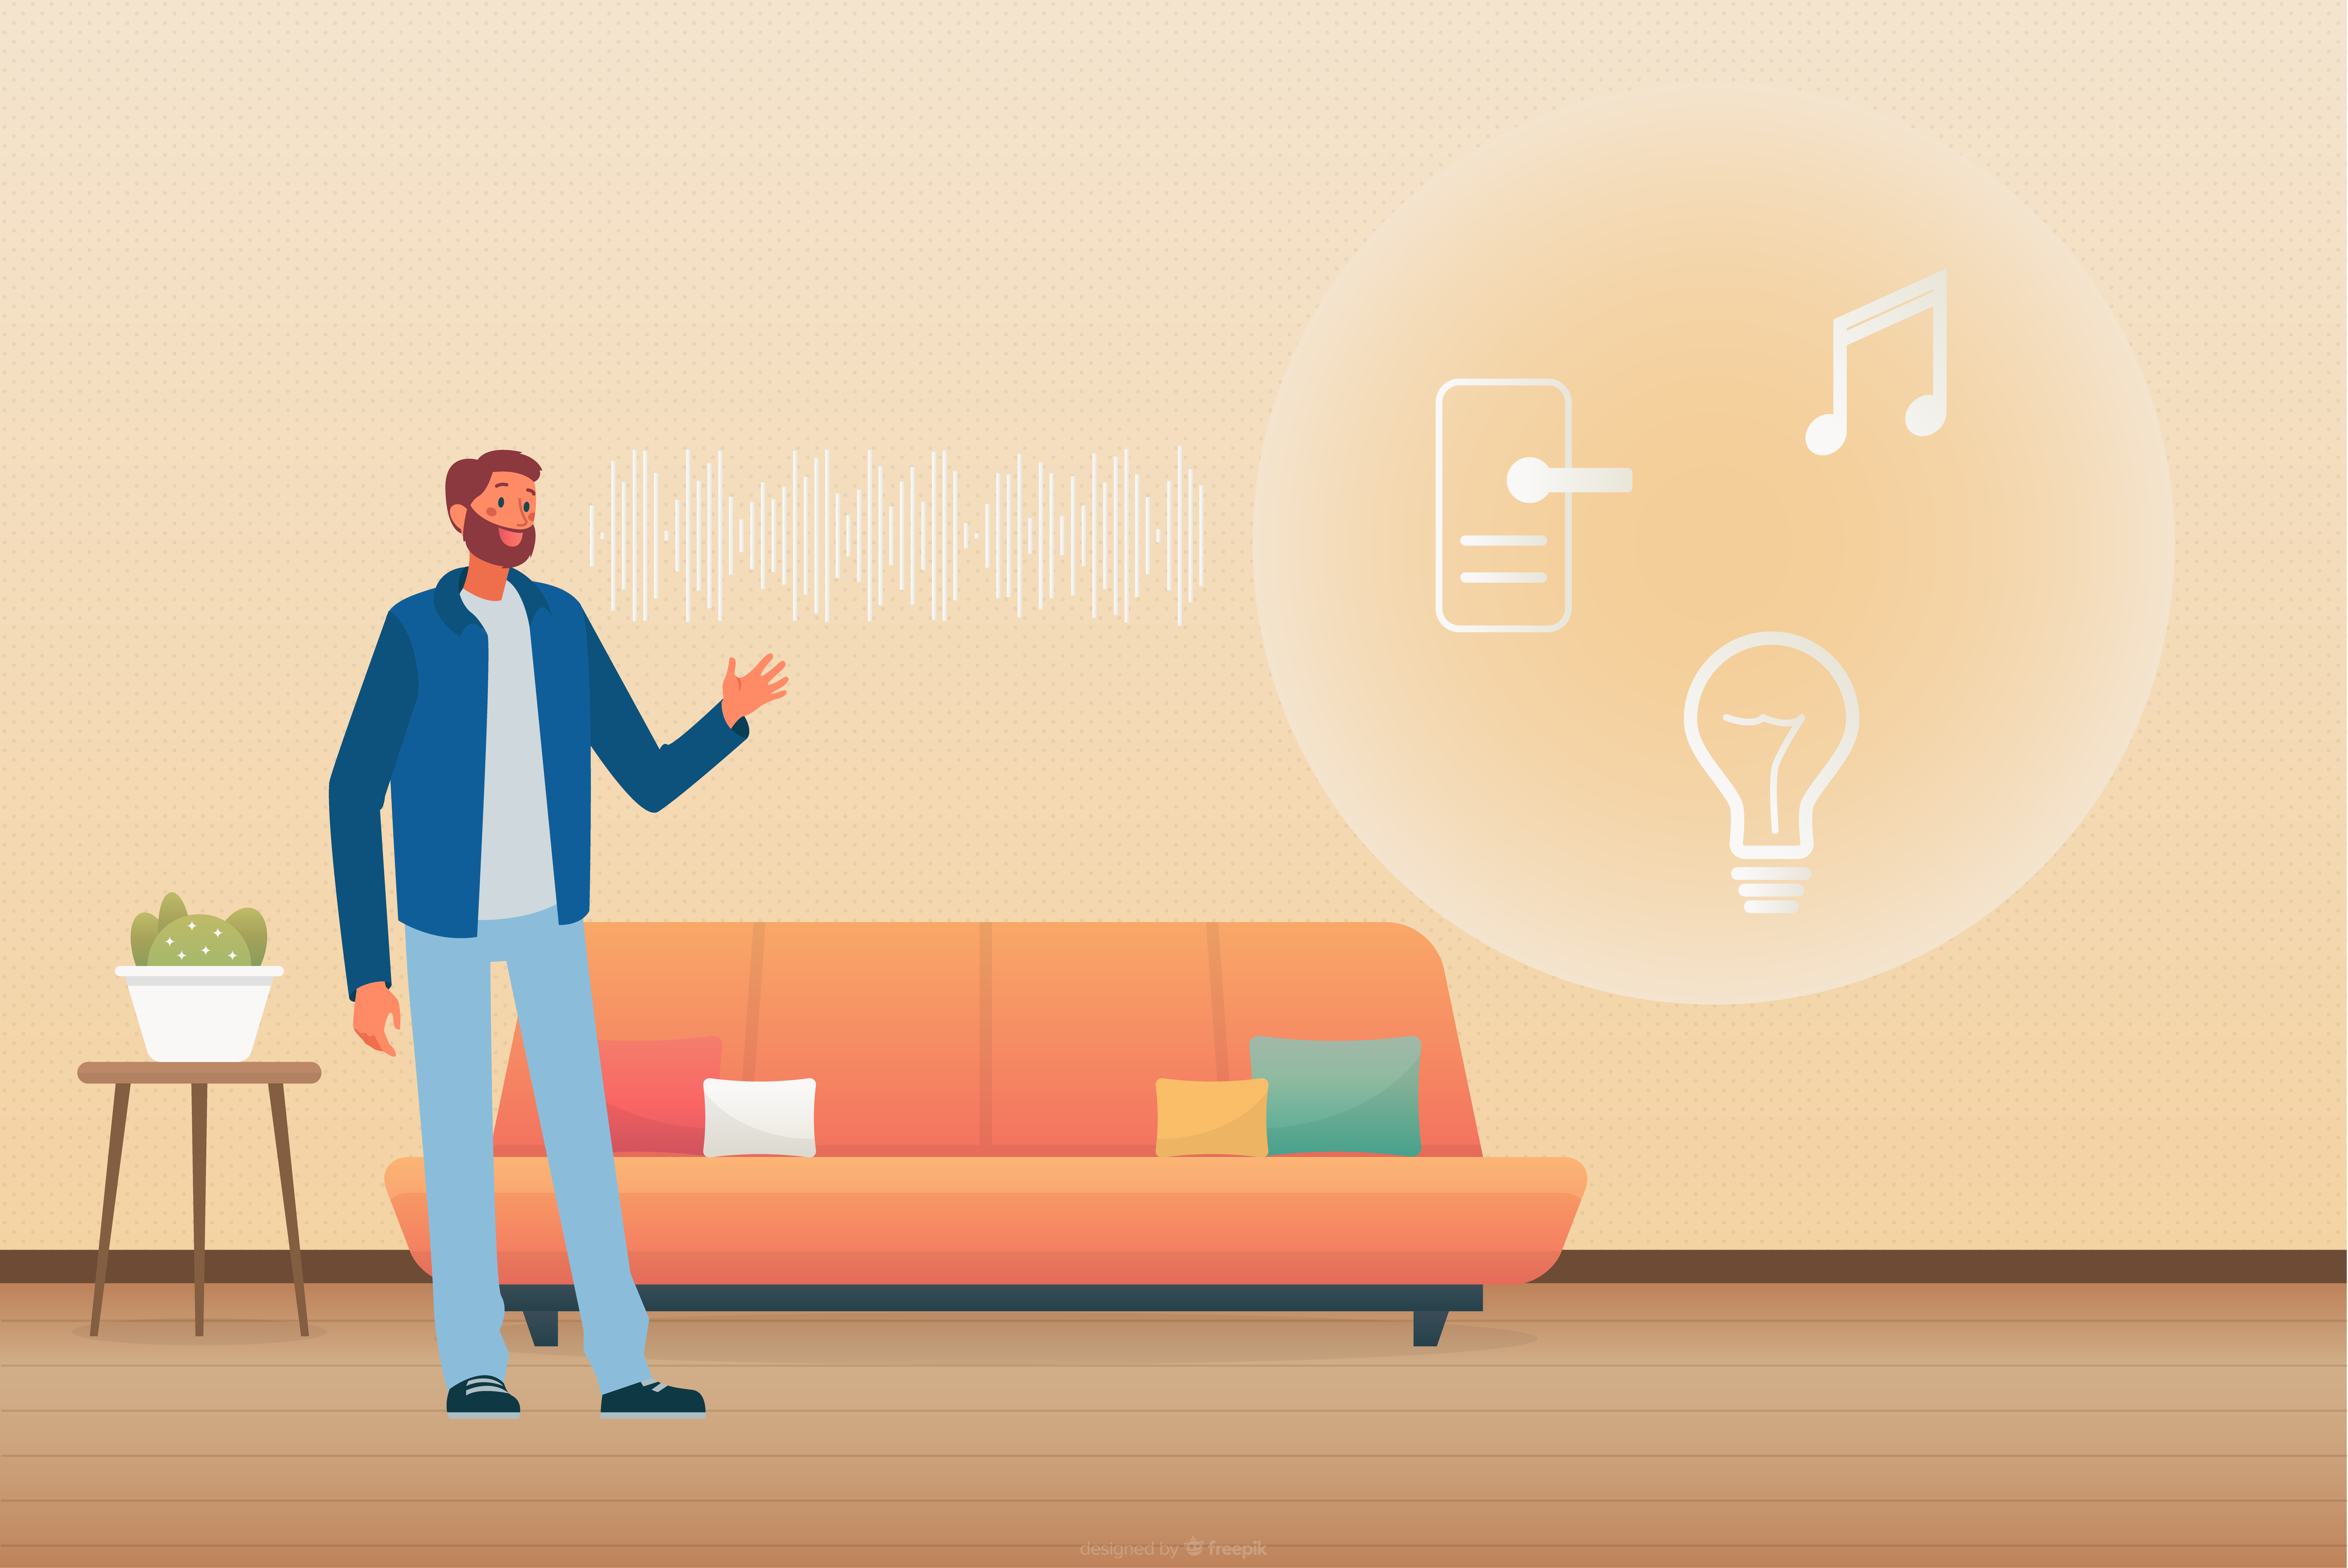 Voice control – Simple and Fun Way to Communicate With Your Smart Home